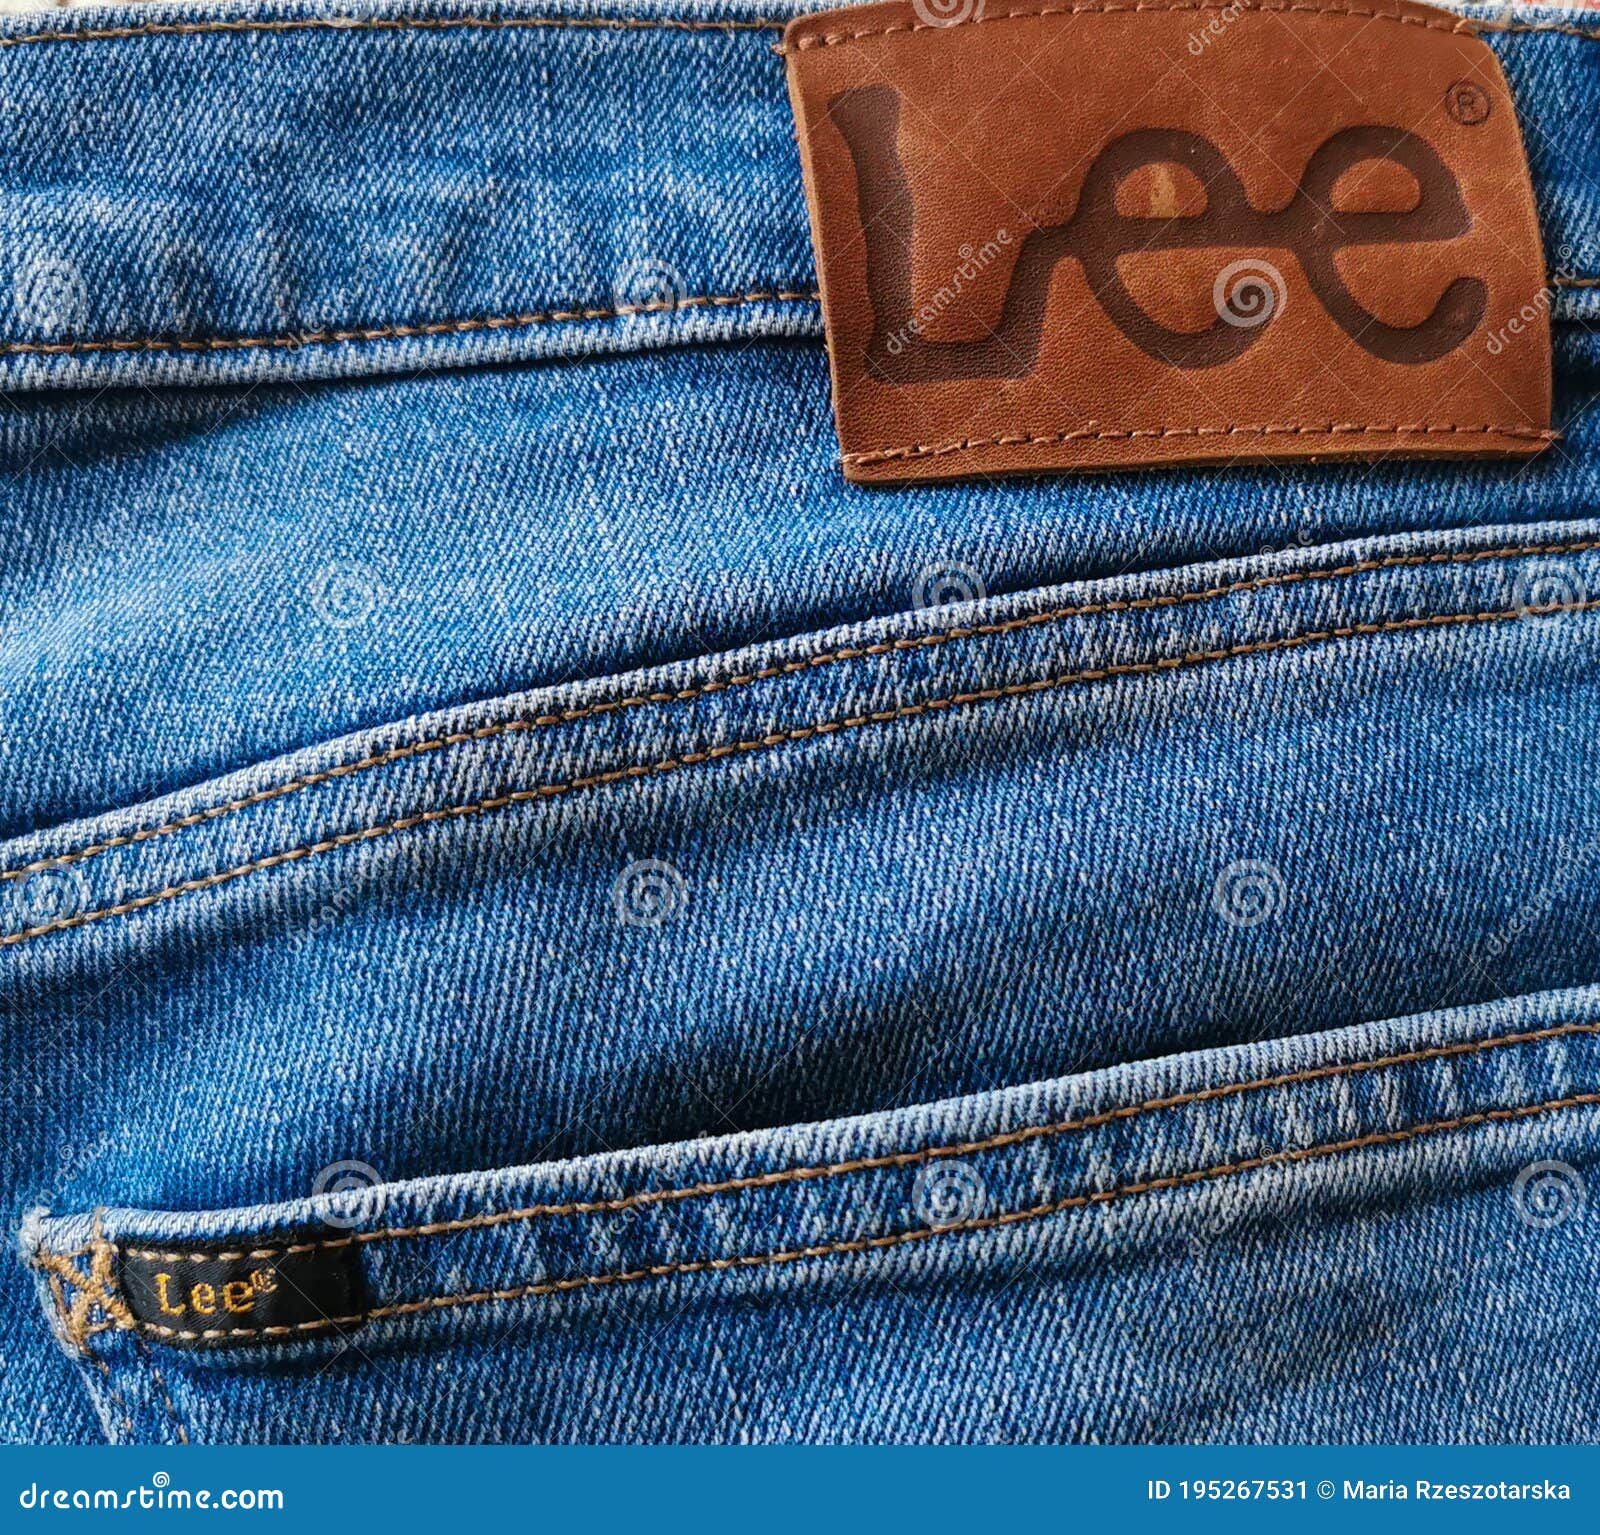 108 Lee Jeans Photos - Free & Royalty-Free Stock Photos from Dreamstime